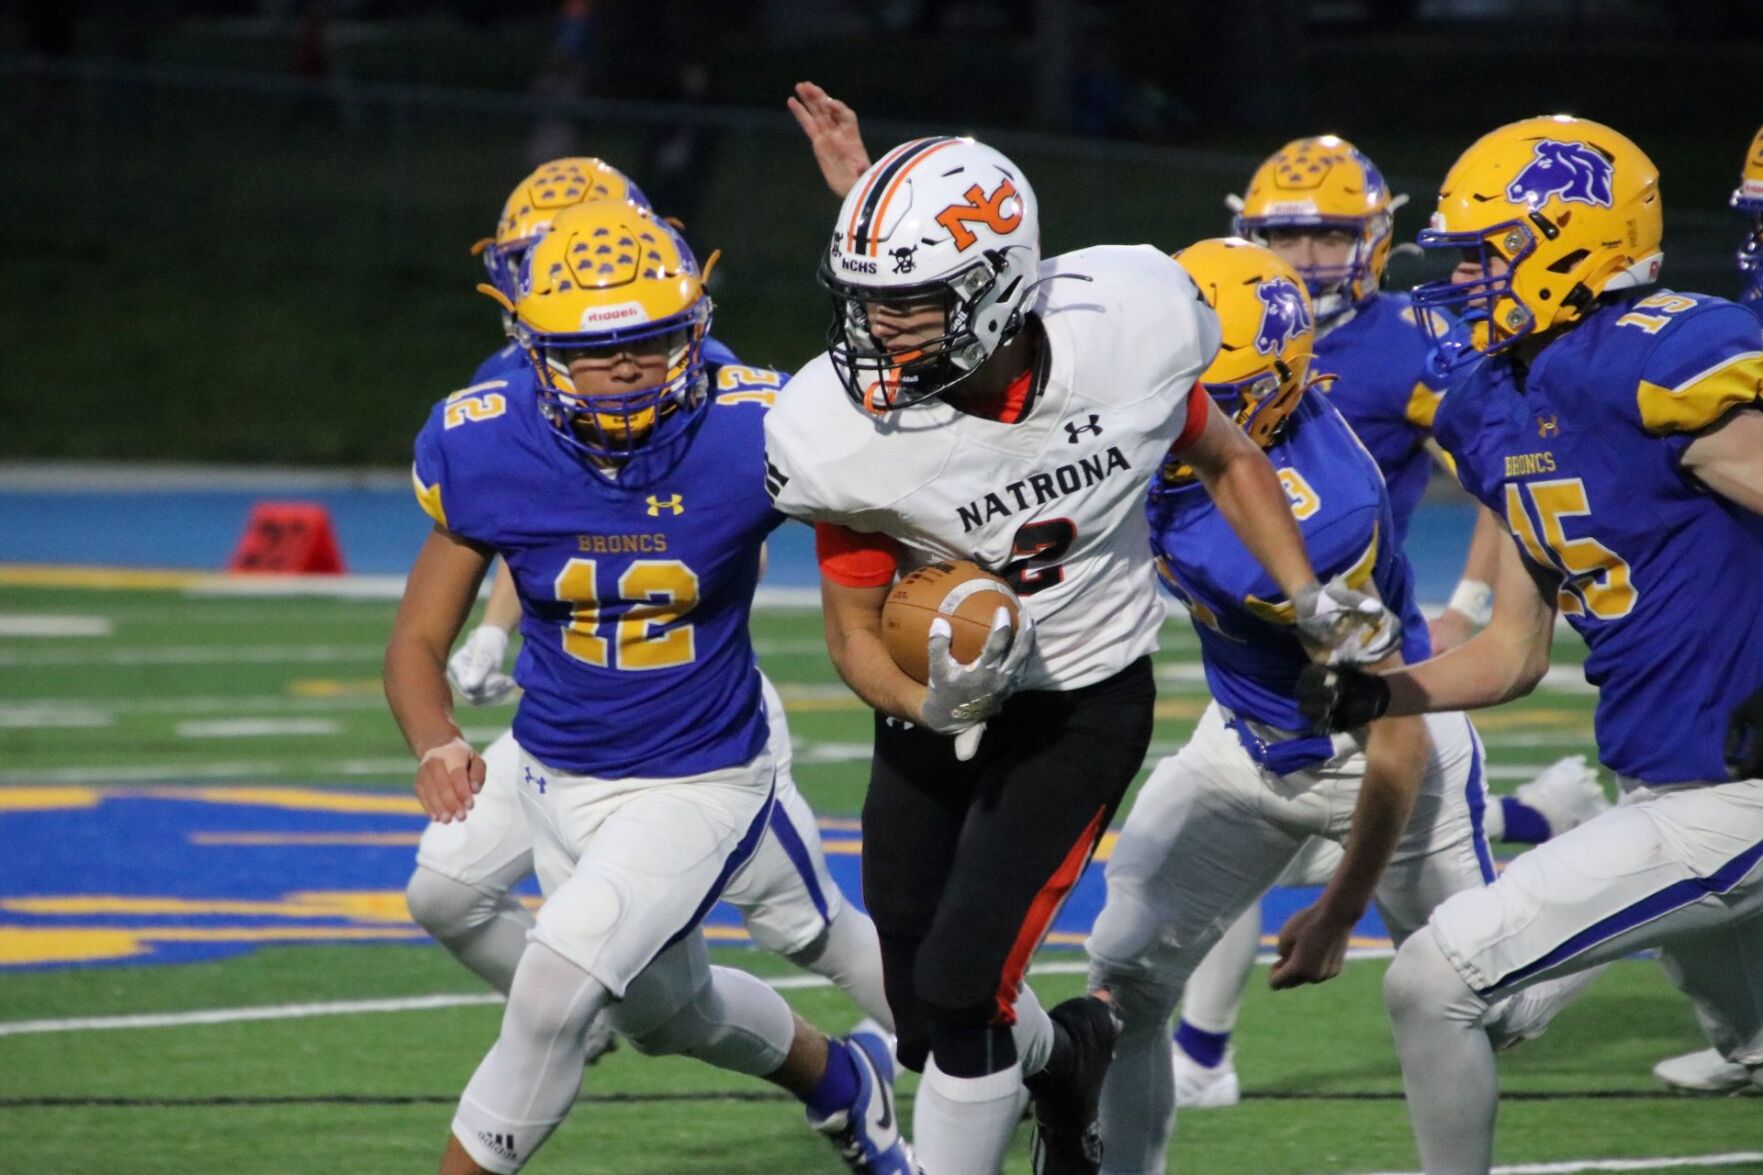 Natrona County and Kelly Walsh Suffer Defeats in Week 7 of High School Football